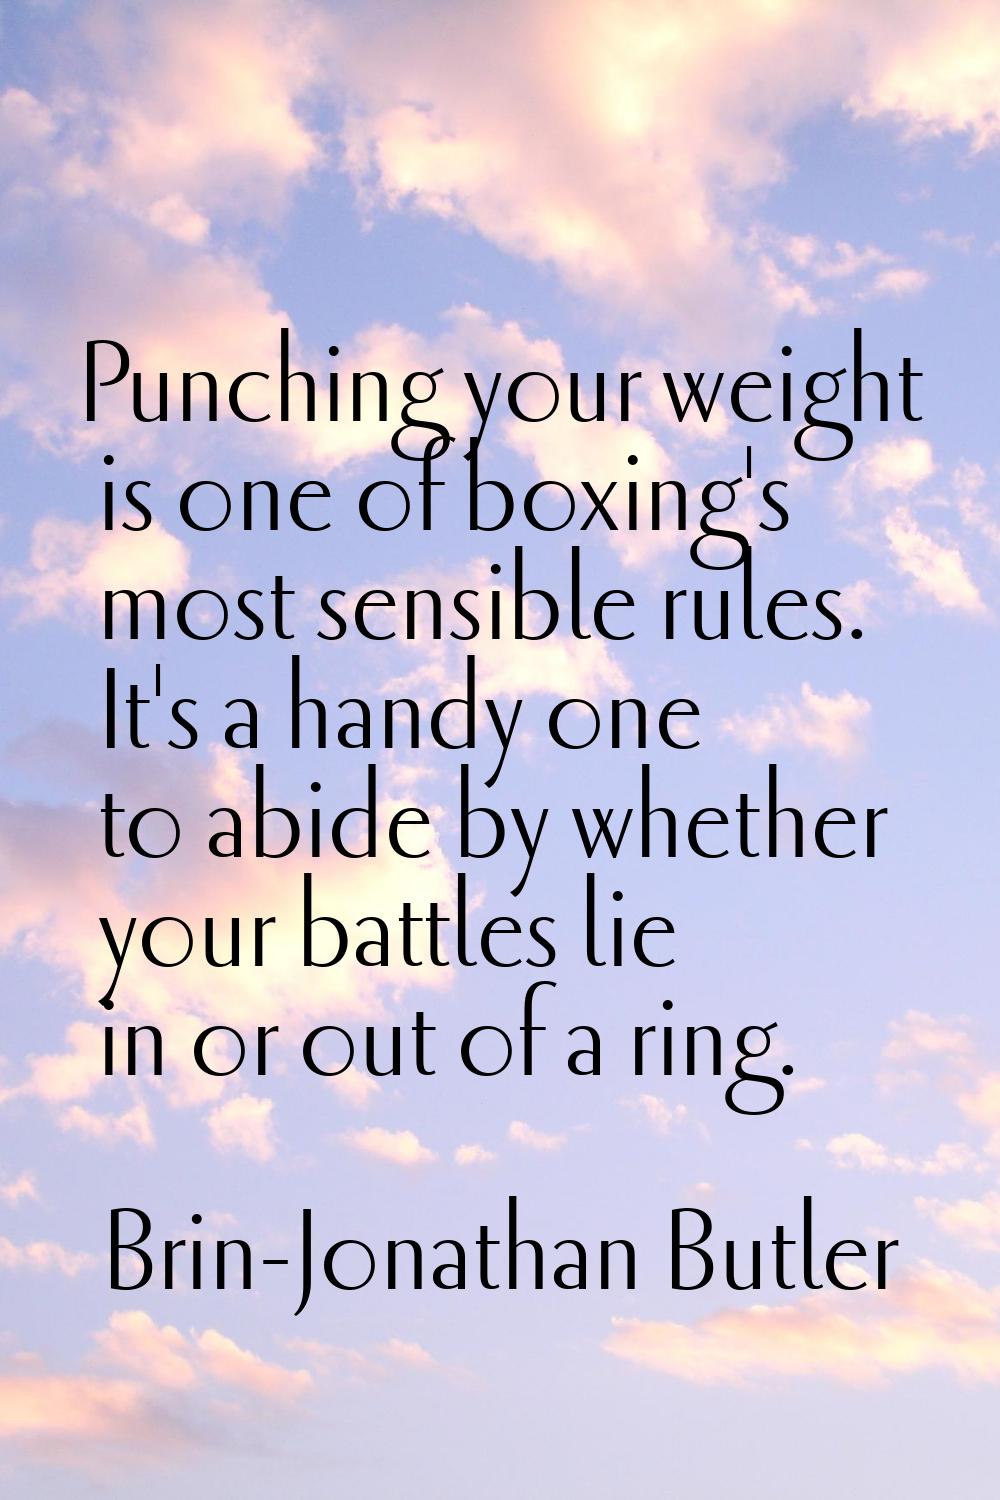 Punching your weight is one of boxing's most sensible rules. It's a handy one to abide by whether y